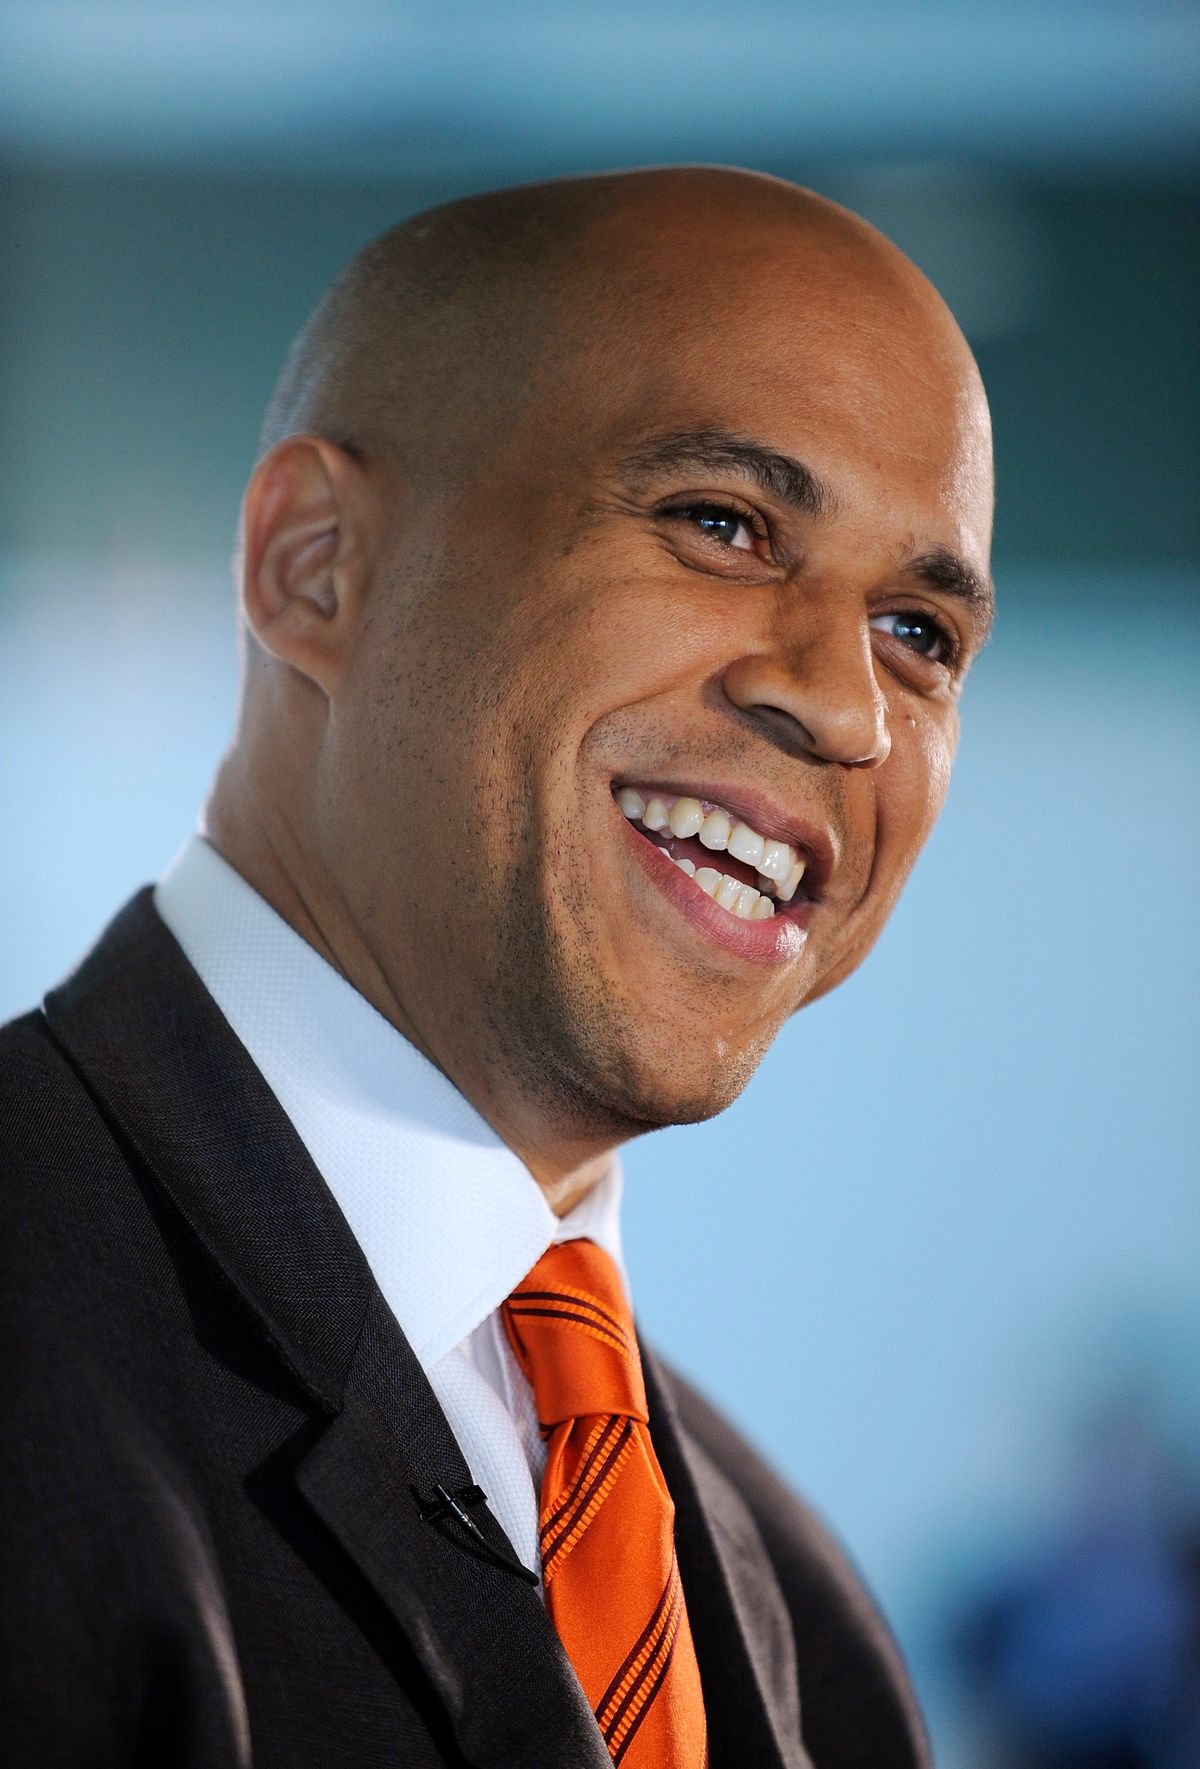 Cory Booker, Mayor of Newark, New Jersey, smiles during an interview at the Newseum in Washington October 2, 2009. The interview was part of the First Draft of History event, held by the Atlantic Magazine and the Aspen Institute to bring together newsmakers, historians and journalists.   REUTERS/Jonathan Ernst    (UNITED STATES POLITICS) (Reuters)